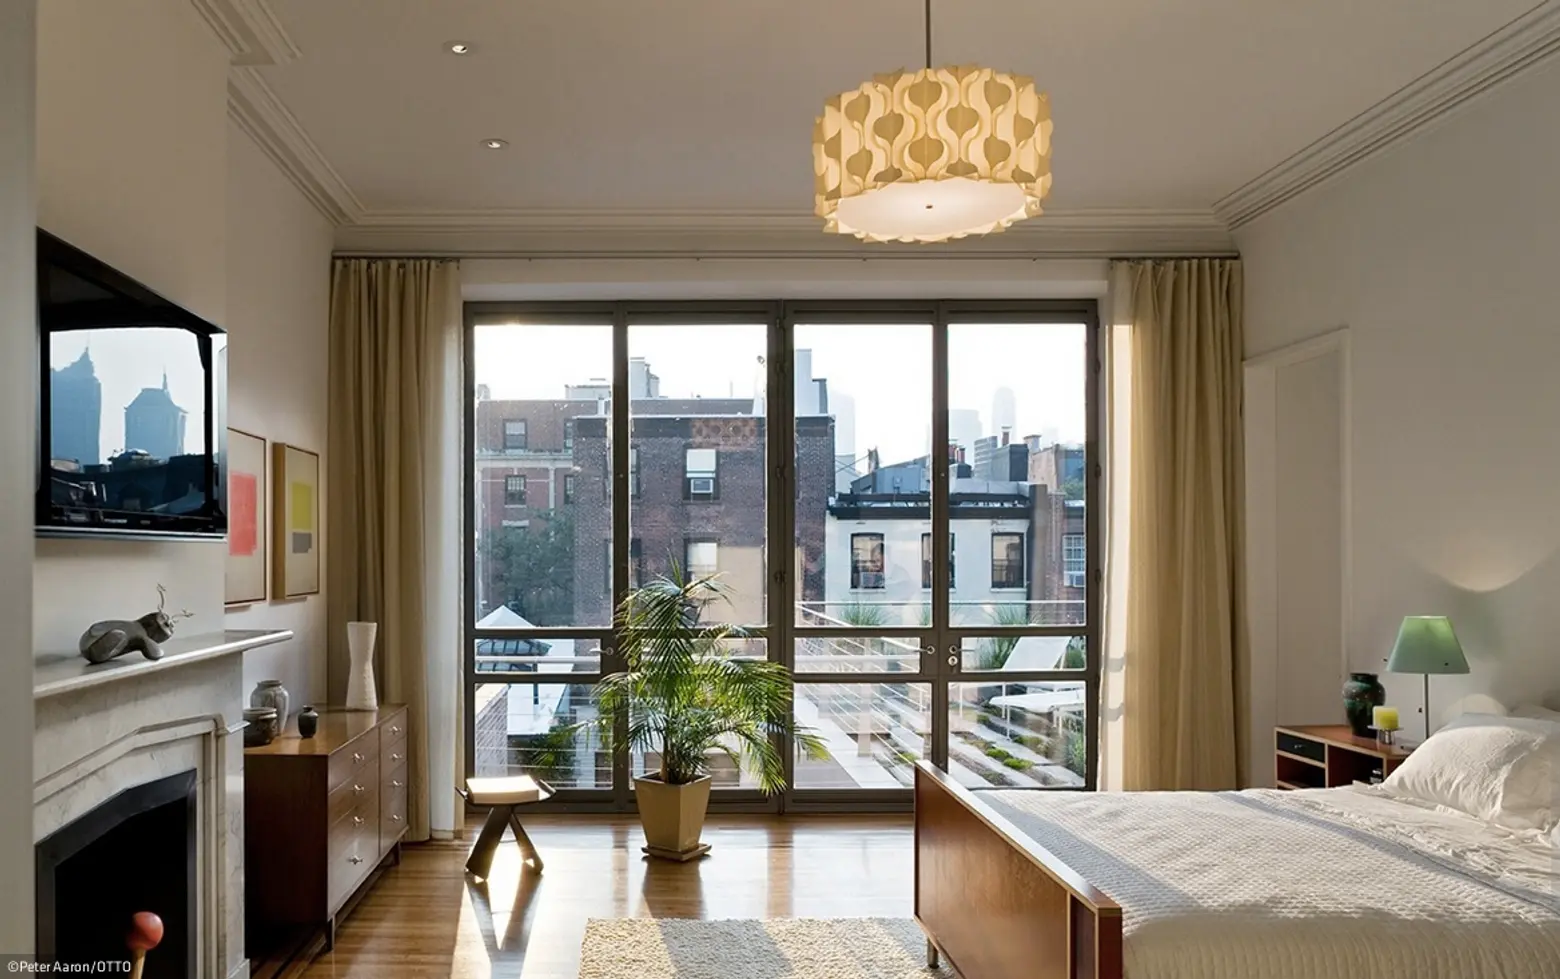 Brooklyn Heights Gothic Revival bedroom, glass wall bedroom